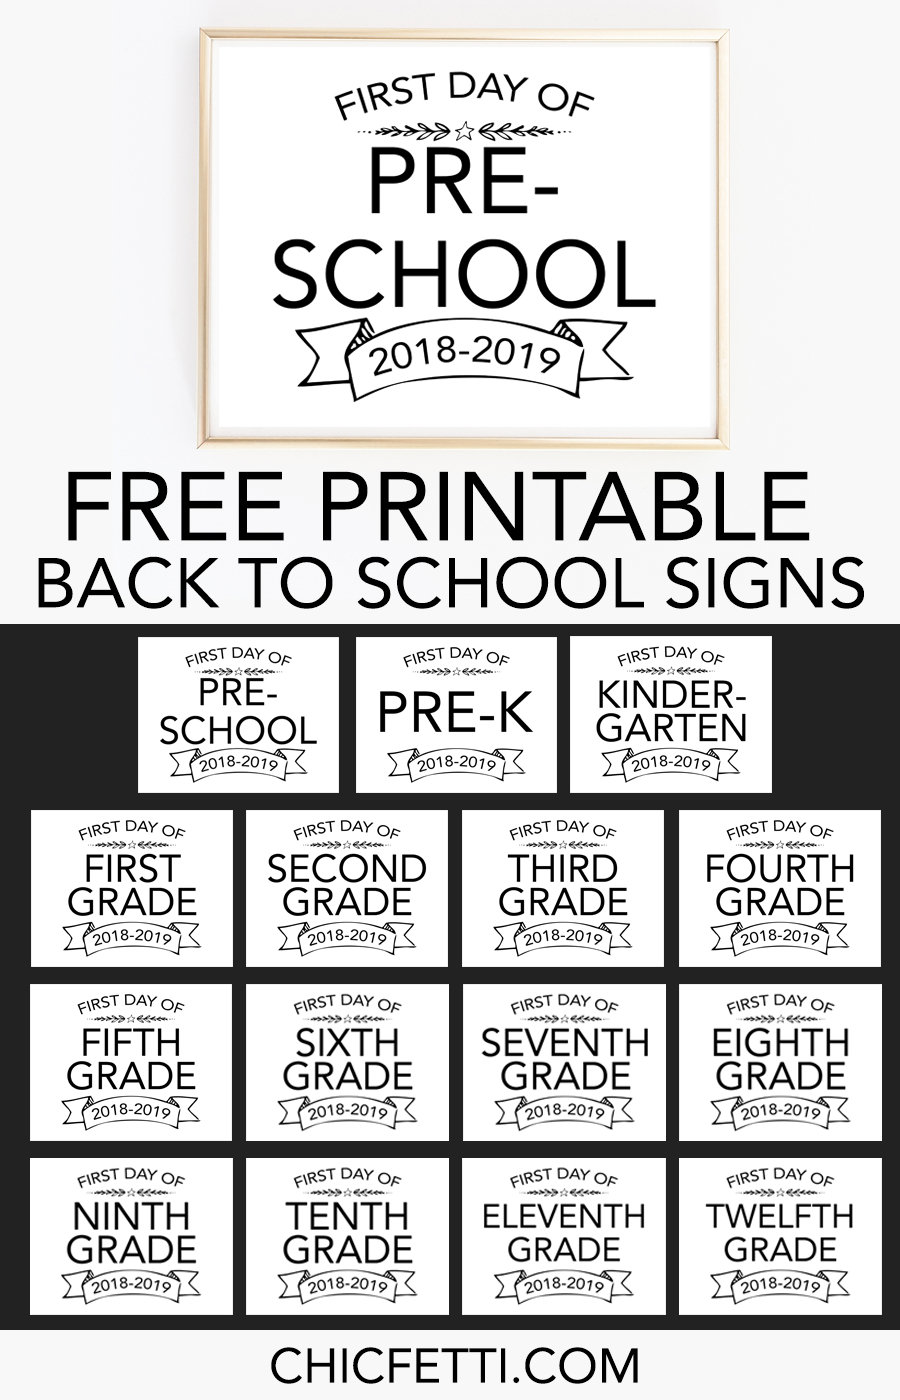 Printable Back To School Signs - Print Our Free First Day Of School - Free Printable Signs